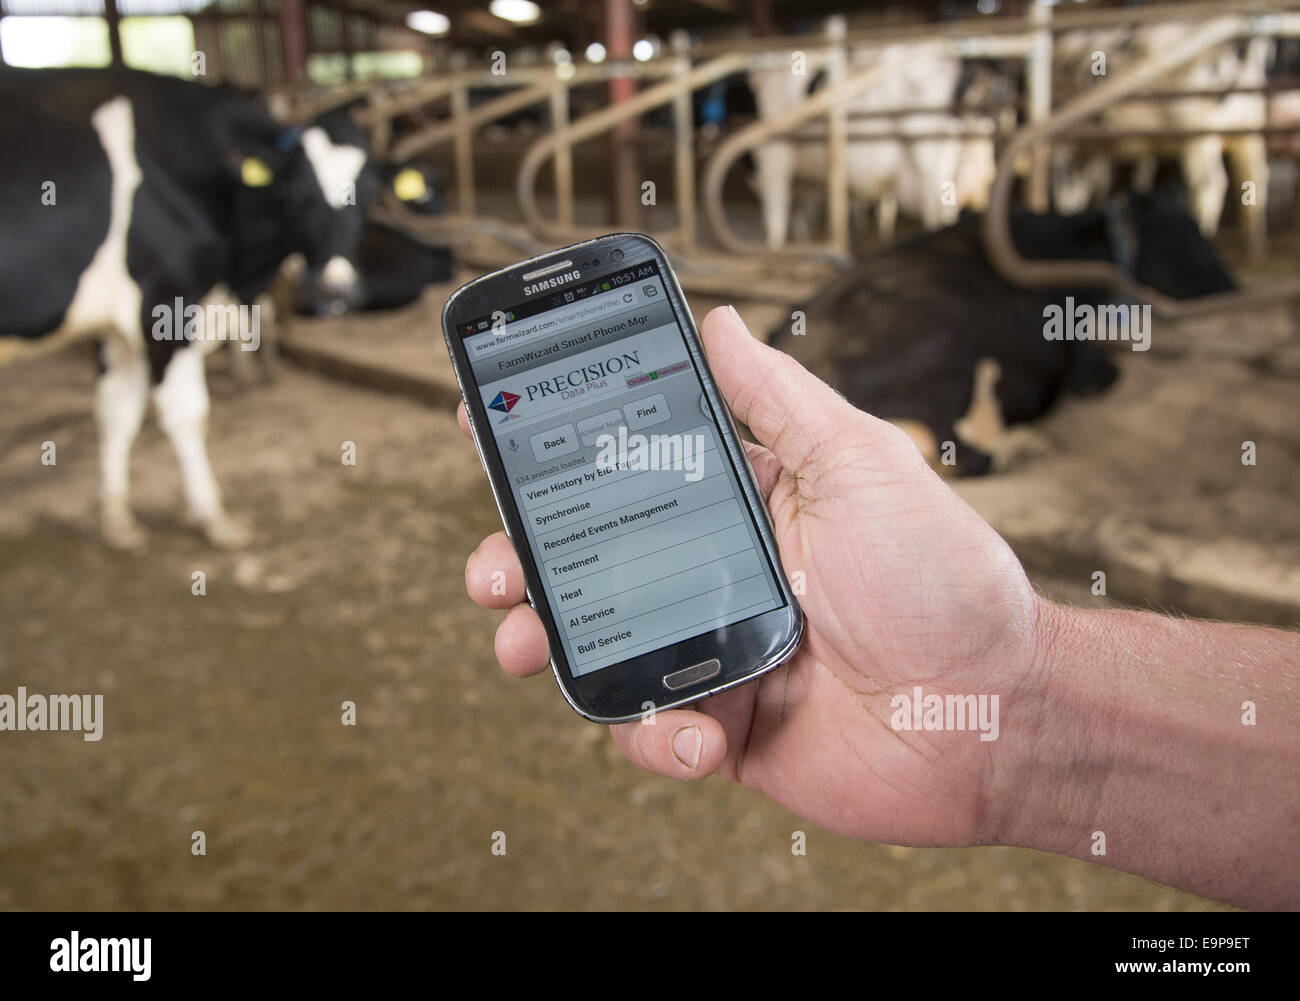 Farm management programme on smart phone held in hand, in cubicle house on dairy farm, Cheshire, England, August Stock Photo